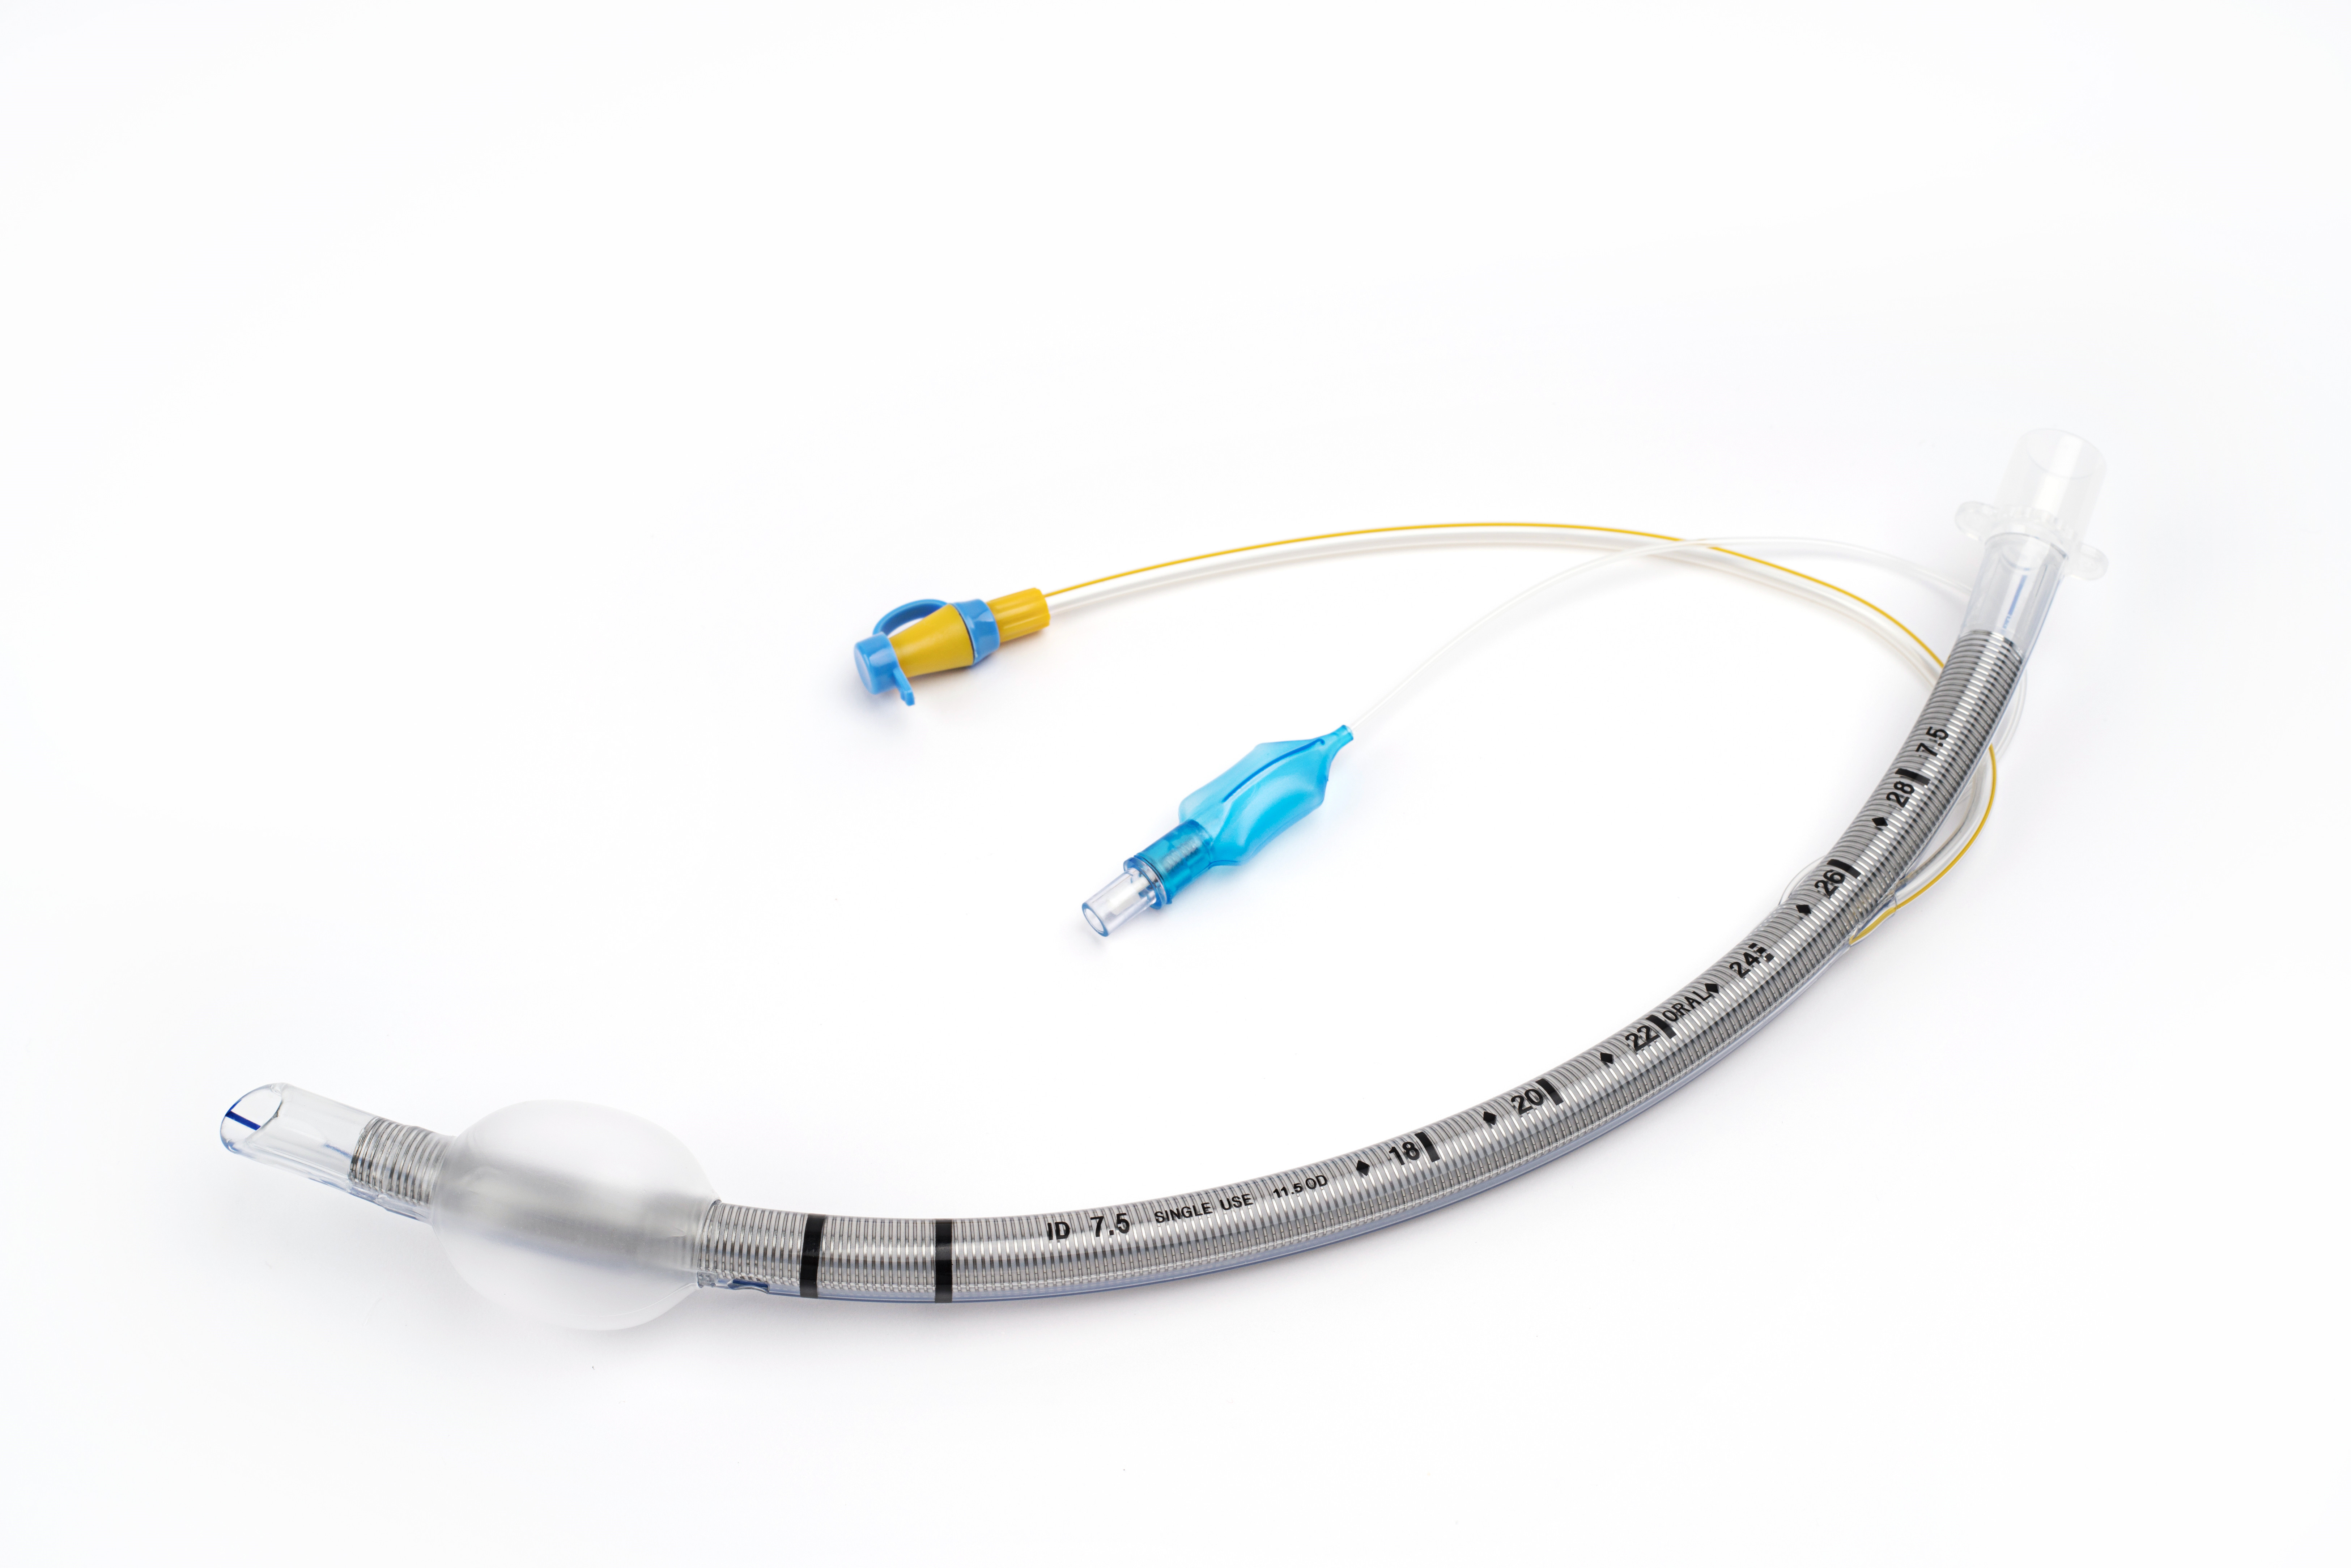  Kink Resistant Reinforced Endotracheal Tube Nasal ETT Tube With Suction Port Manufactures